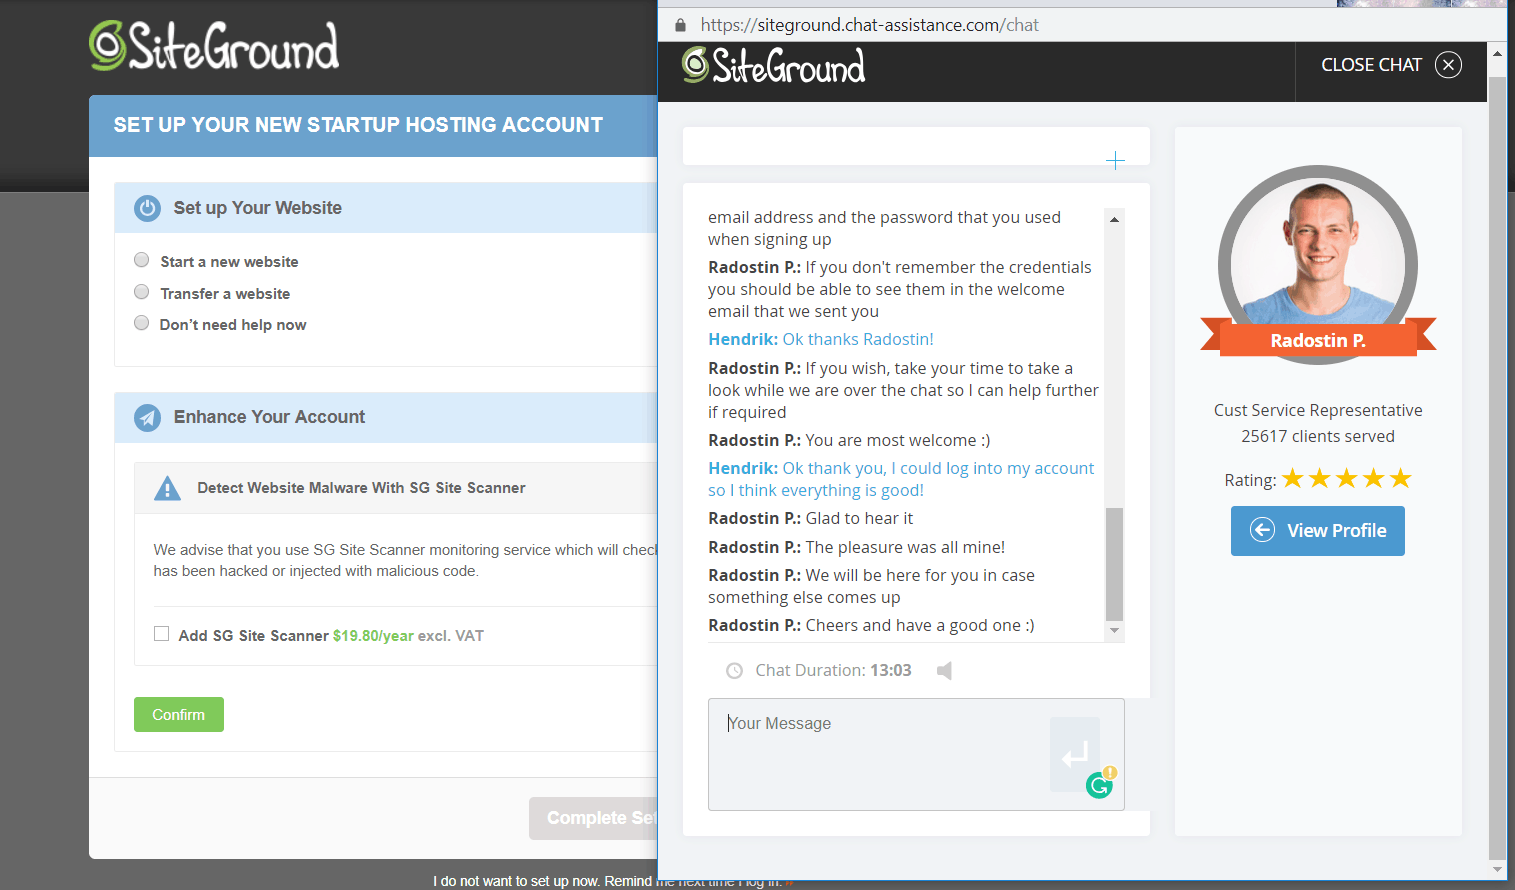 [SiteGround] - [support chat]